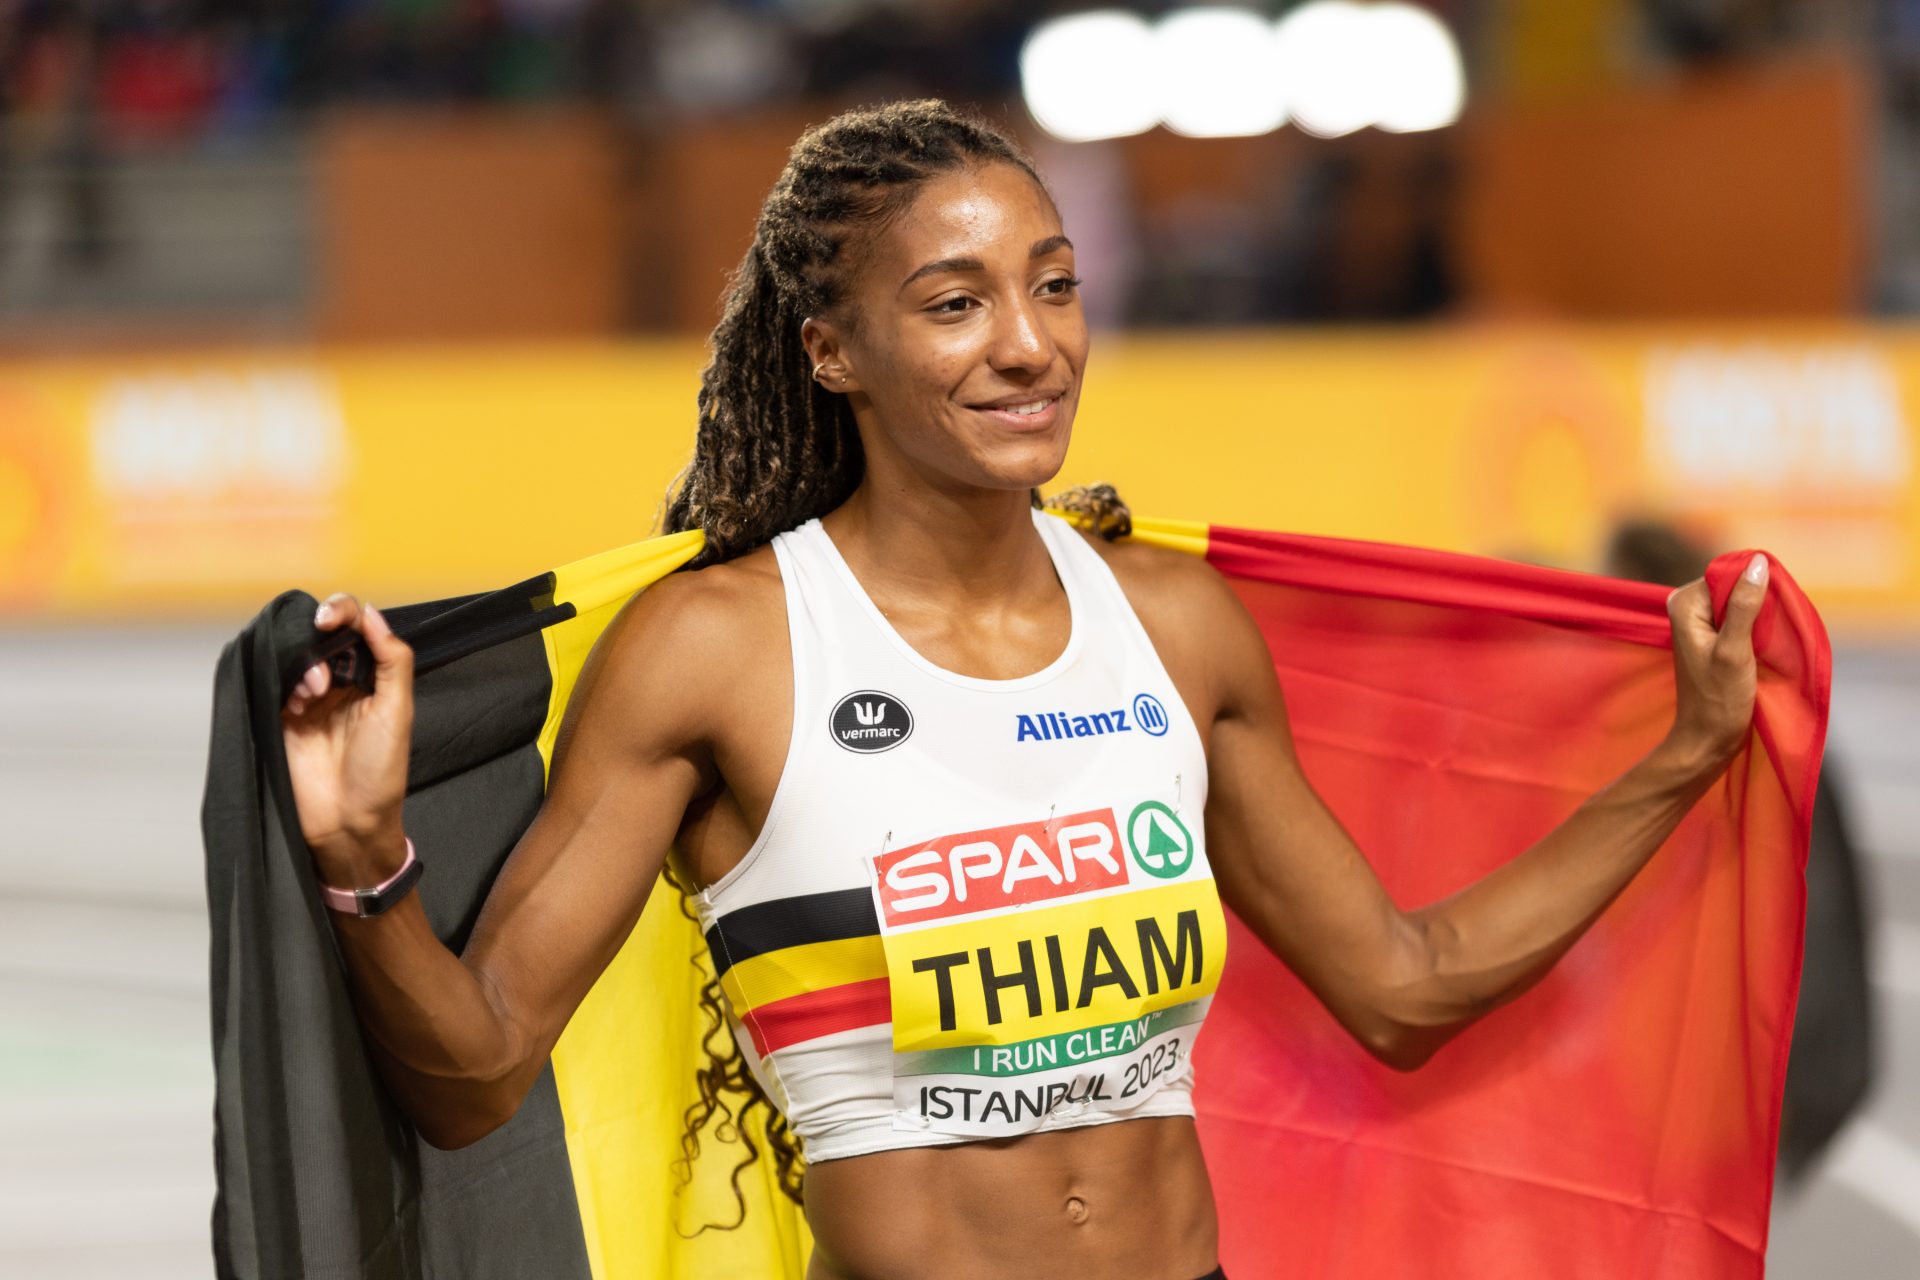 Nafi Thiam: double Olympic champion yet to qualify for Paris